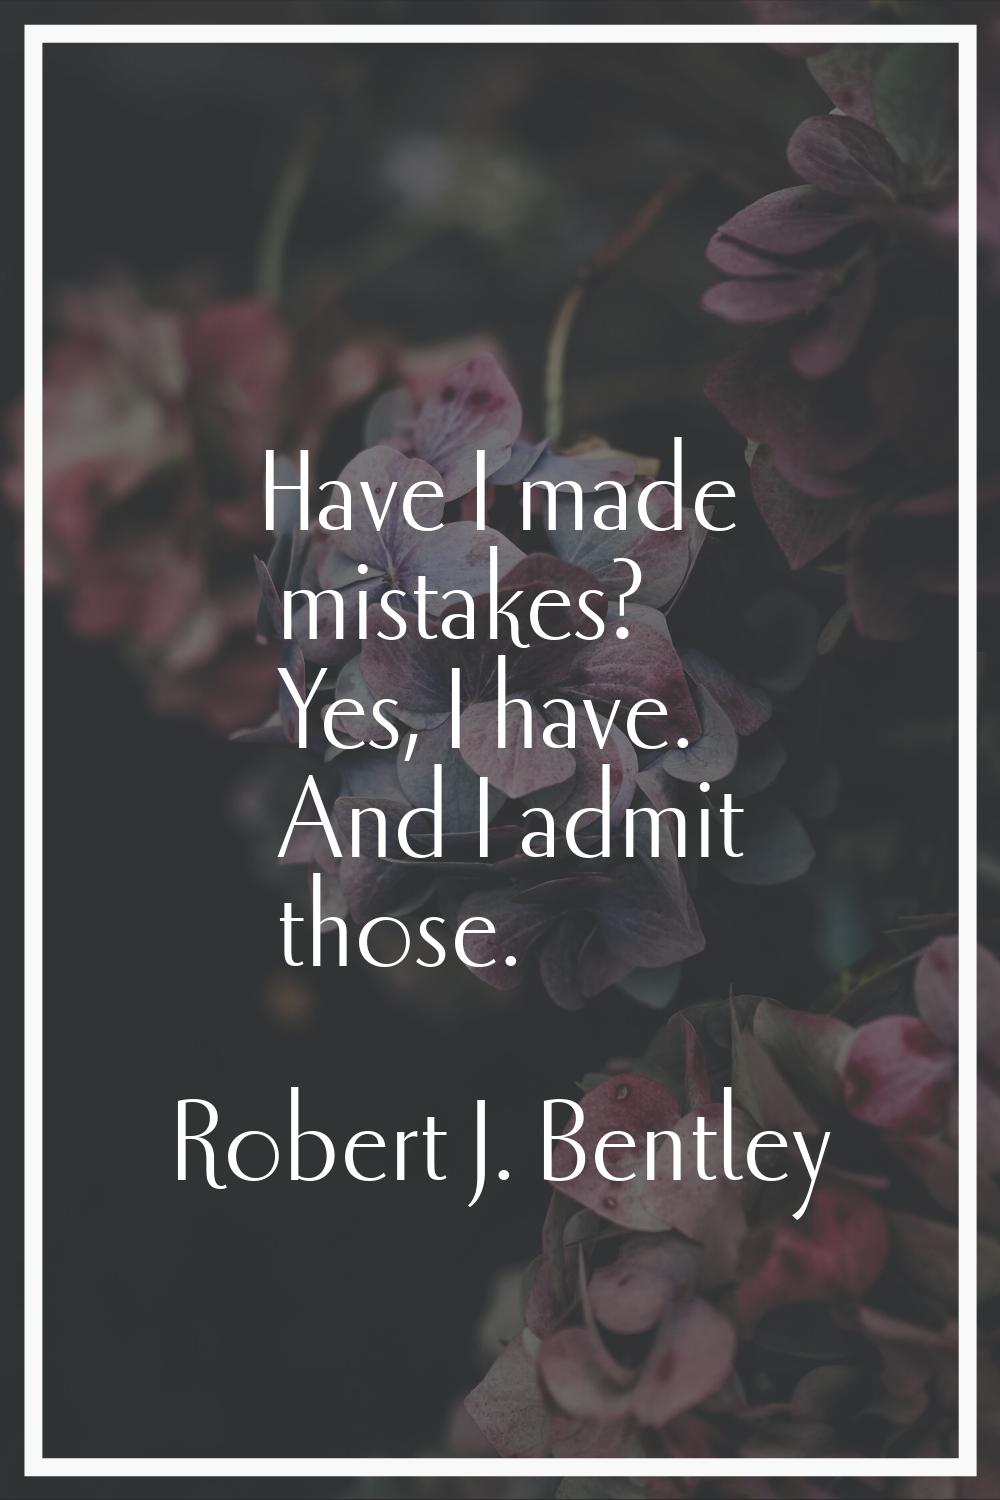 Have I made mistakes? Yes, I have. And I admit those.